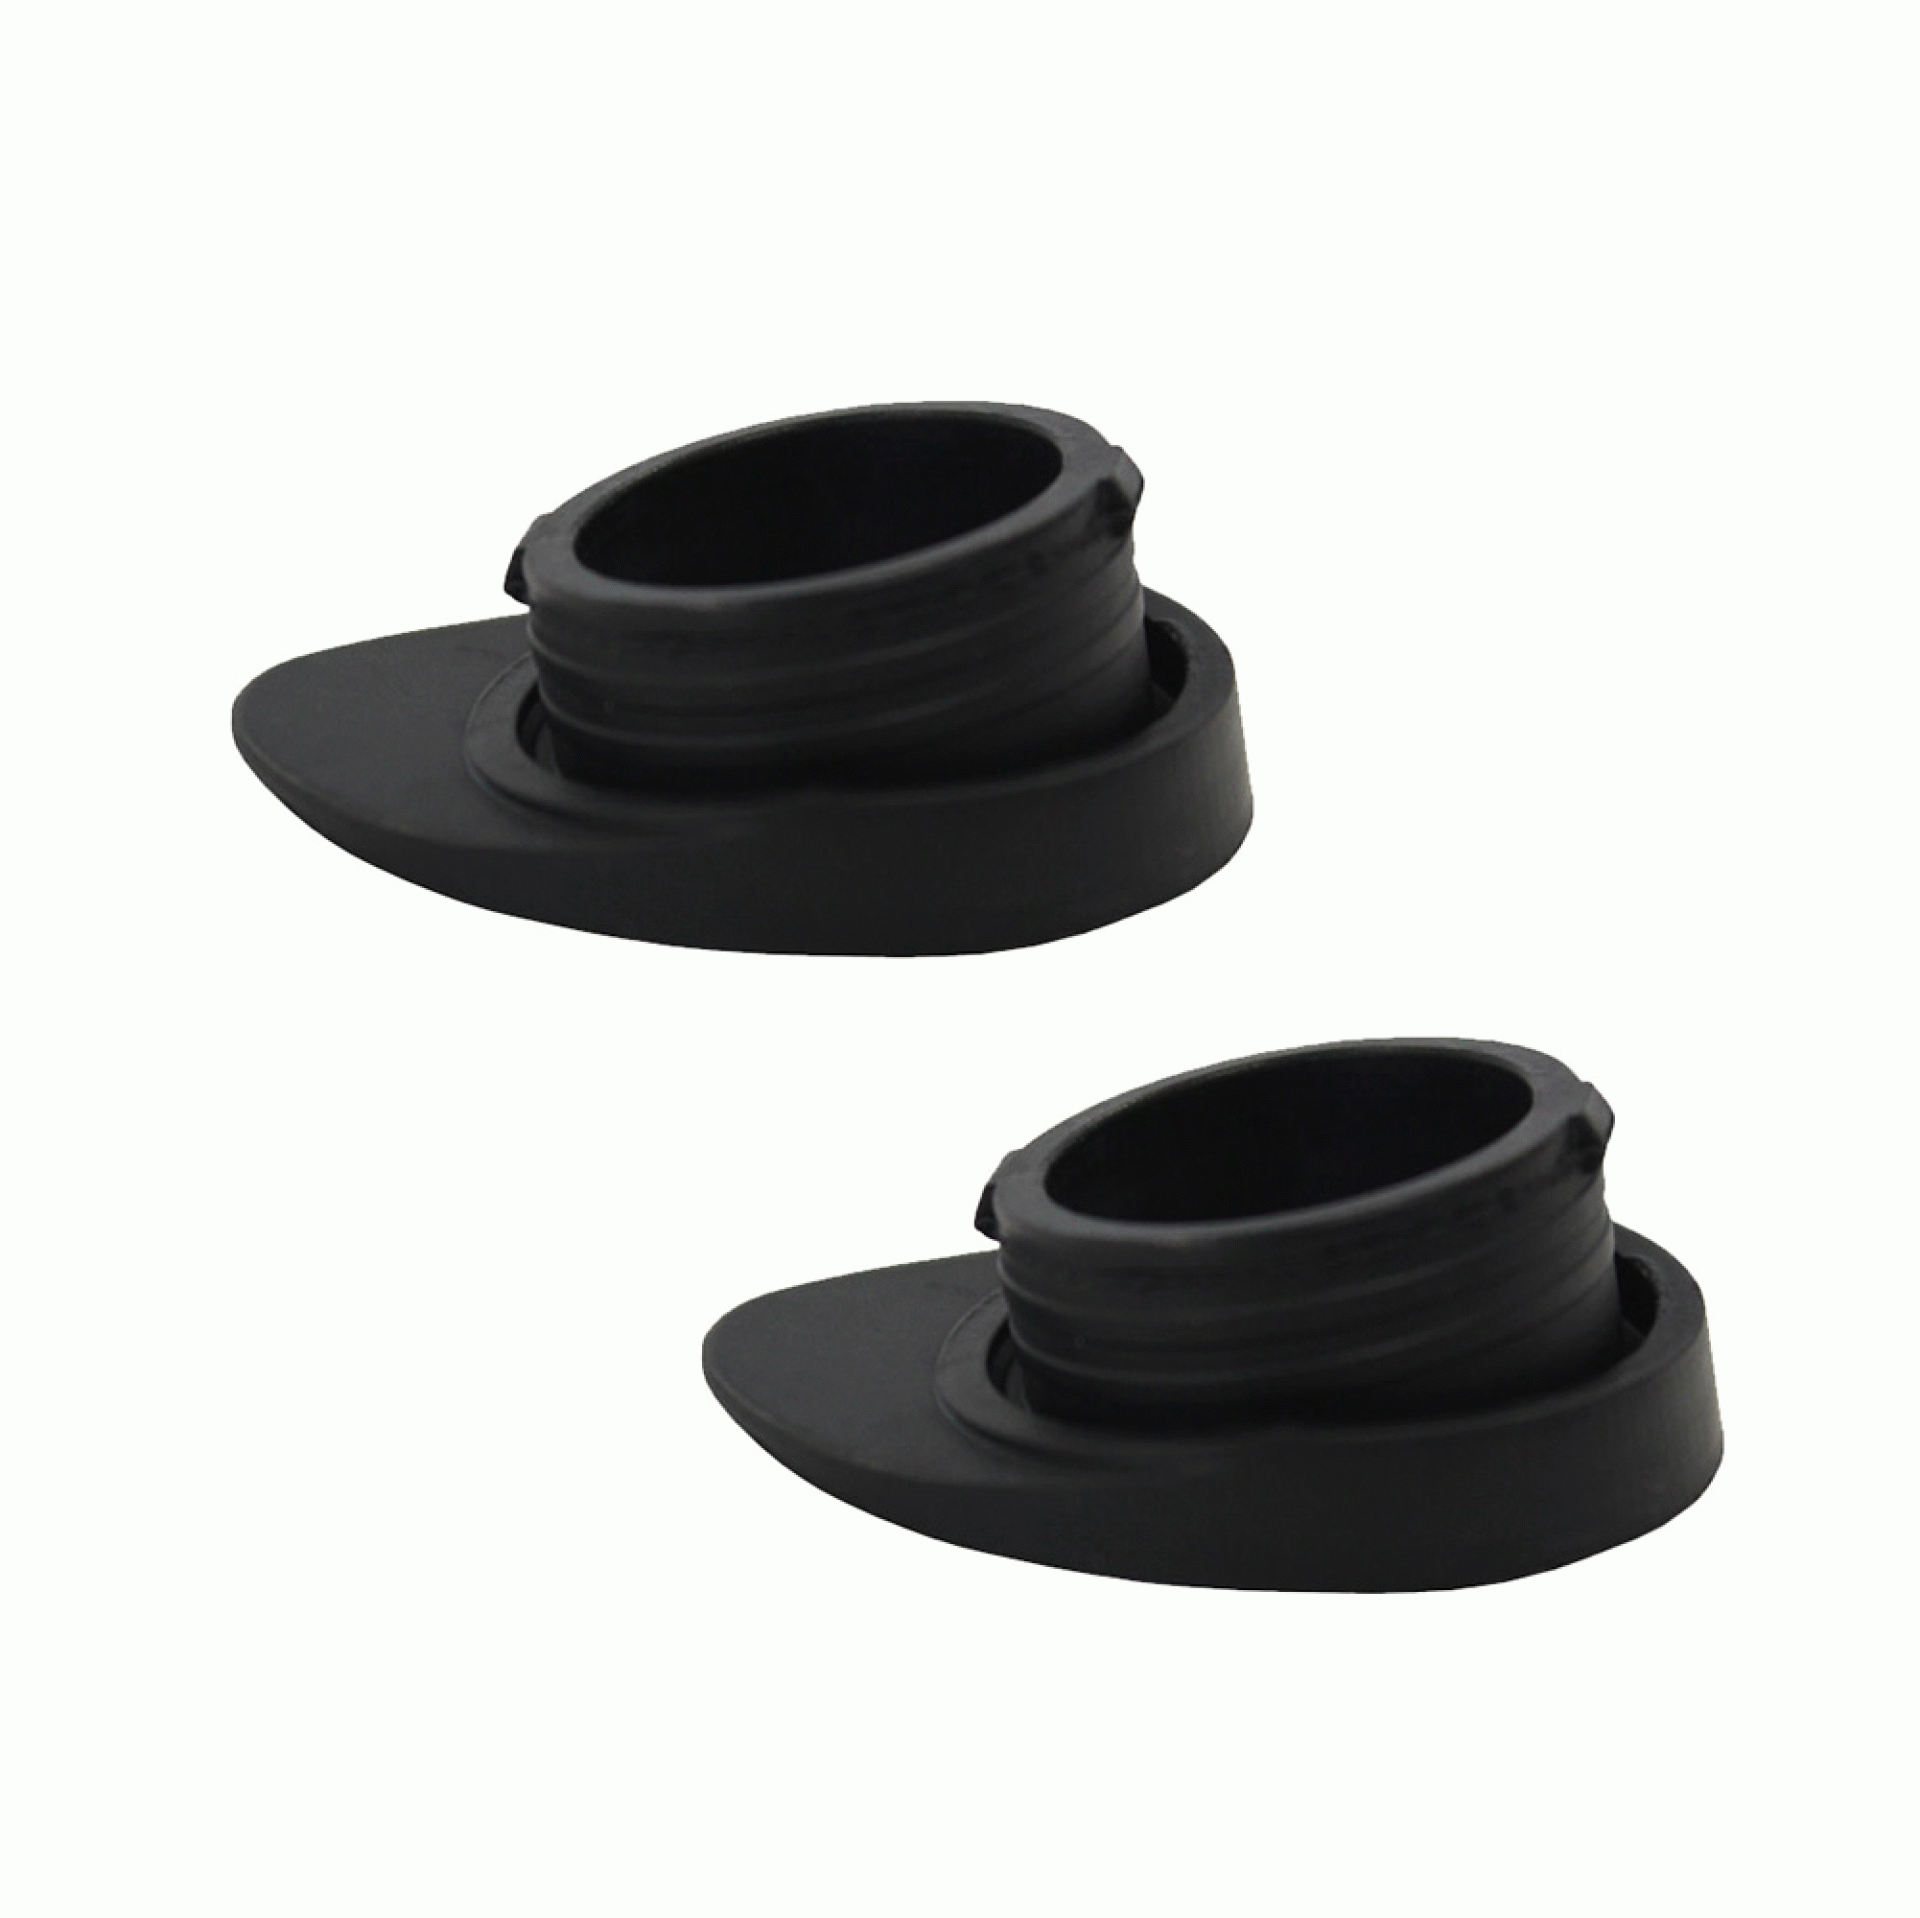 Lippert Components | 733925 | Plug for Override LCI Power Smart Jack (Pair)